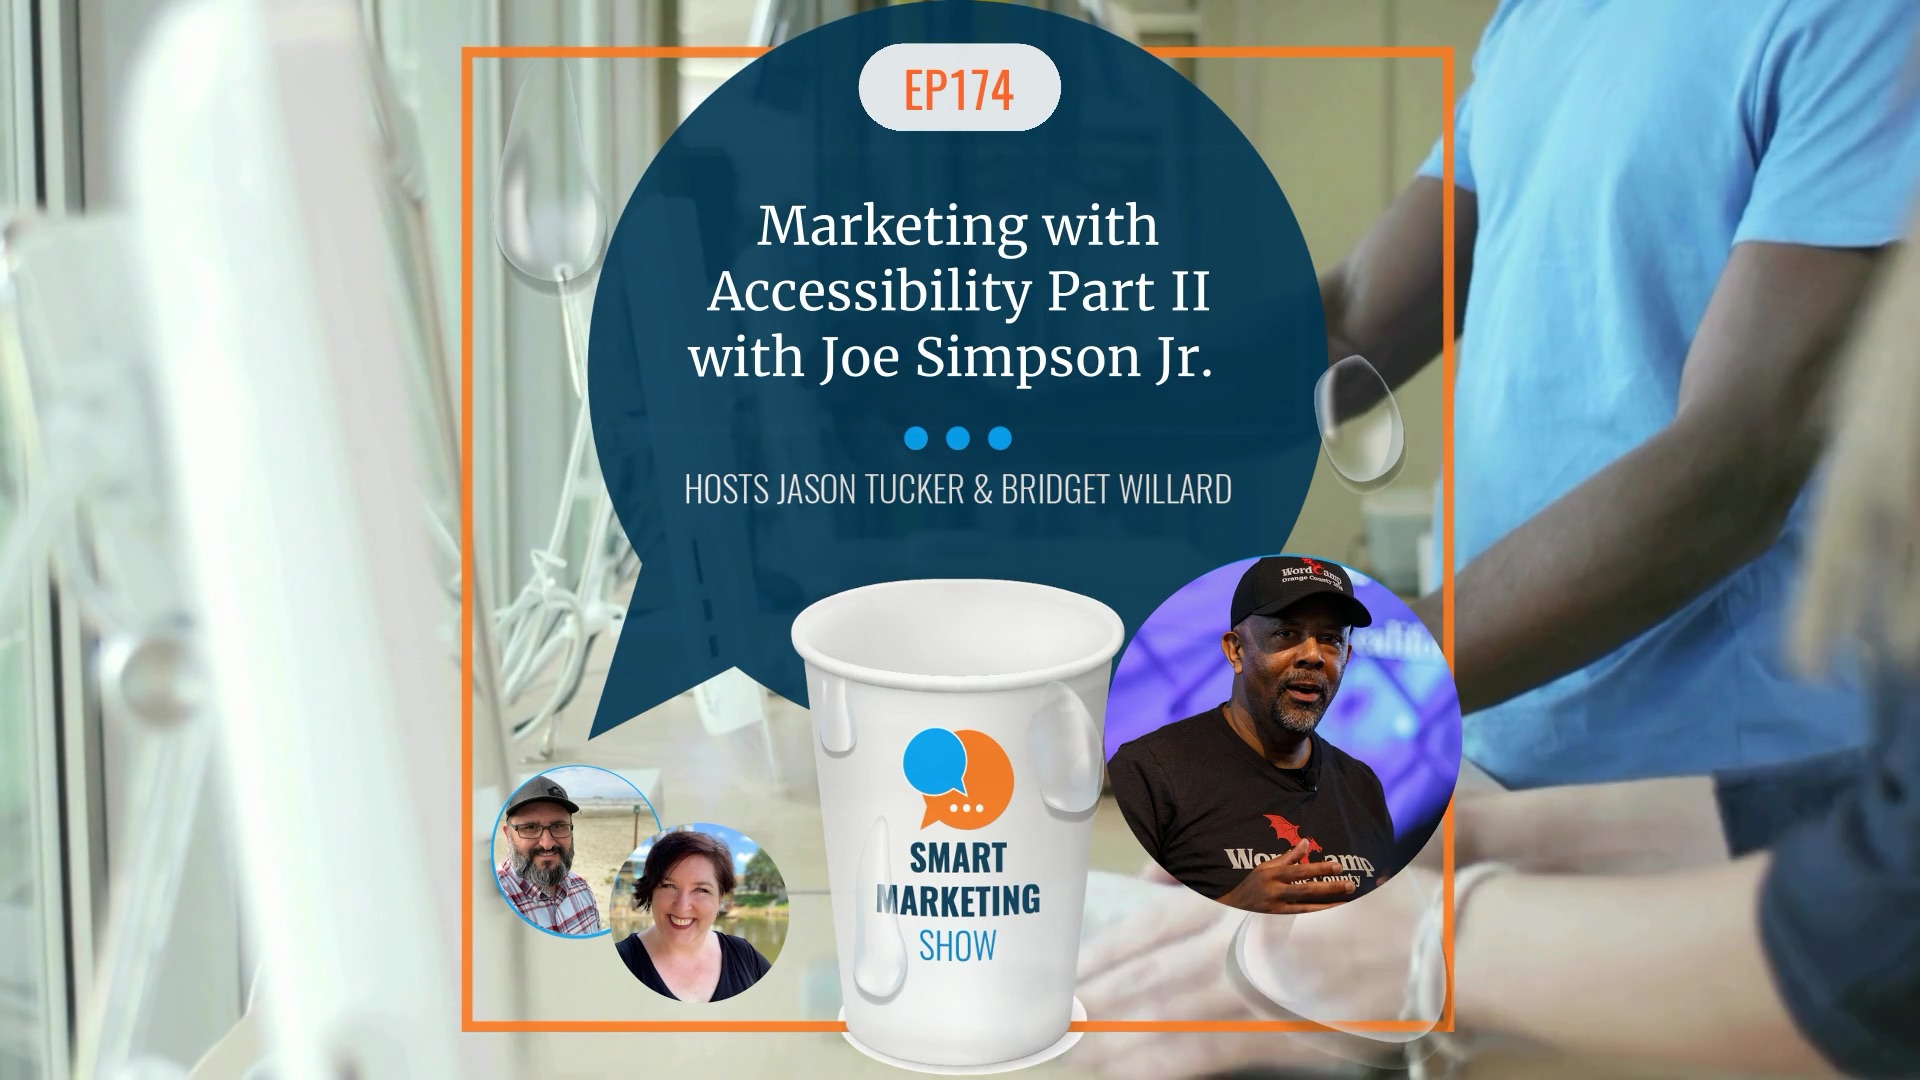 EP174 – Marketing with Accessibility Part II with Joe Simpson Jr